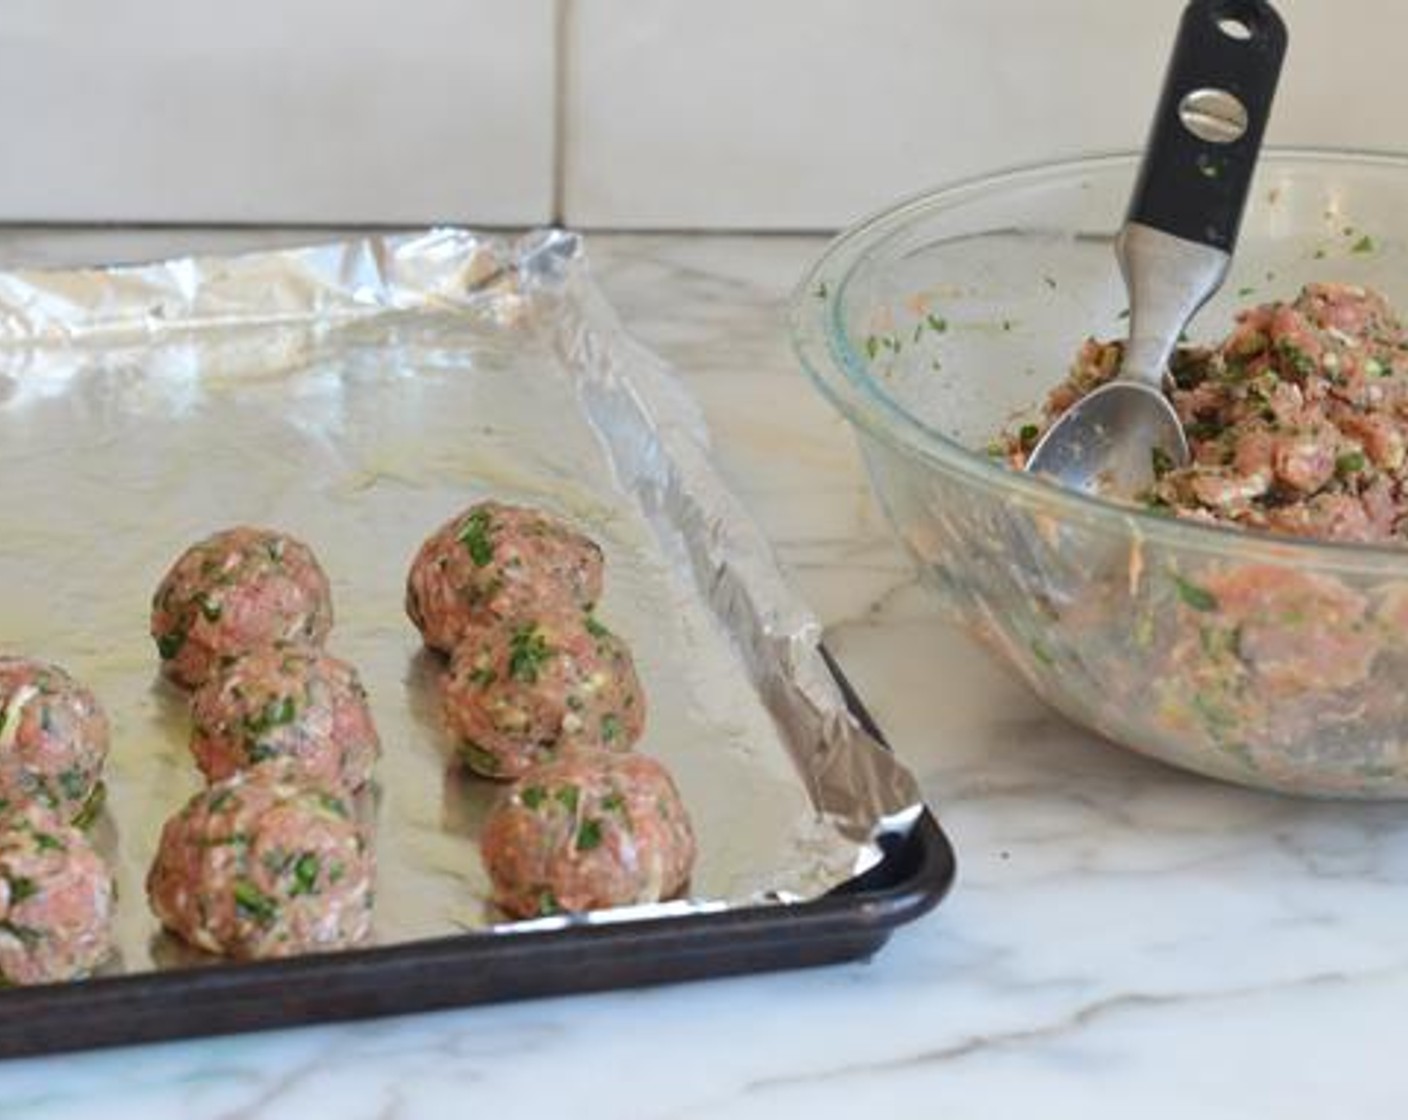 step 4 Shape the mixture into 1-1/2 inch balls and place on the prepared baking sheet. Broil the meatballs until golden brown on top, about 10 minutes.